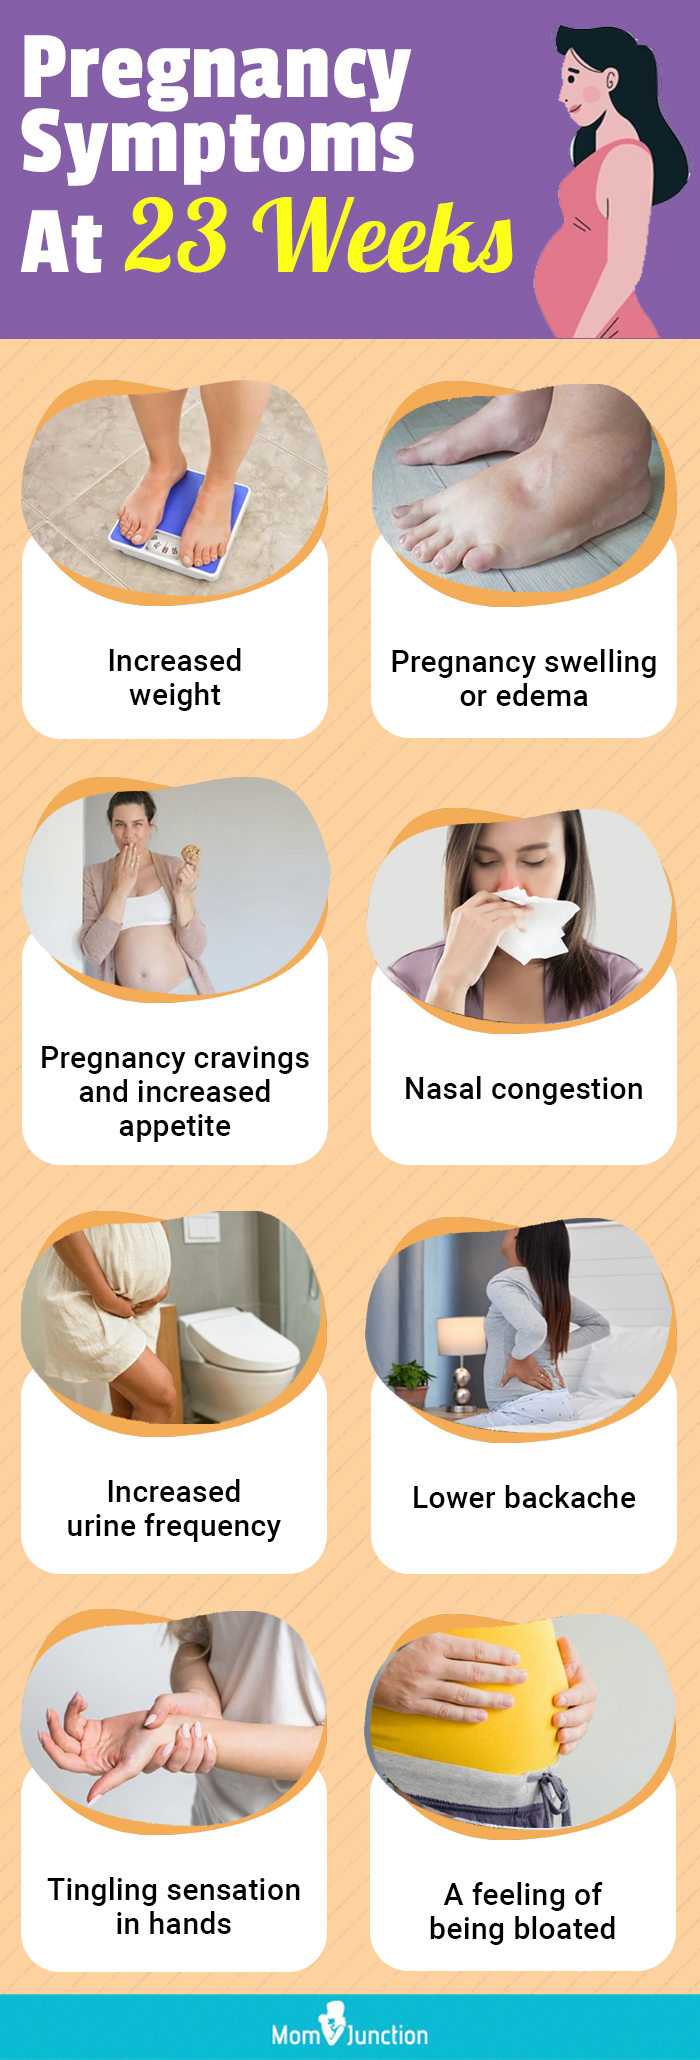 pregnancy symptoms at 23 weeks (infographic)